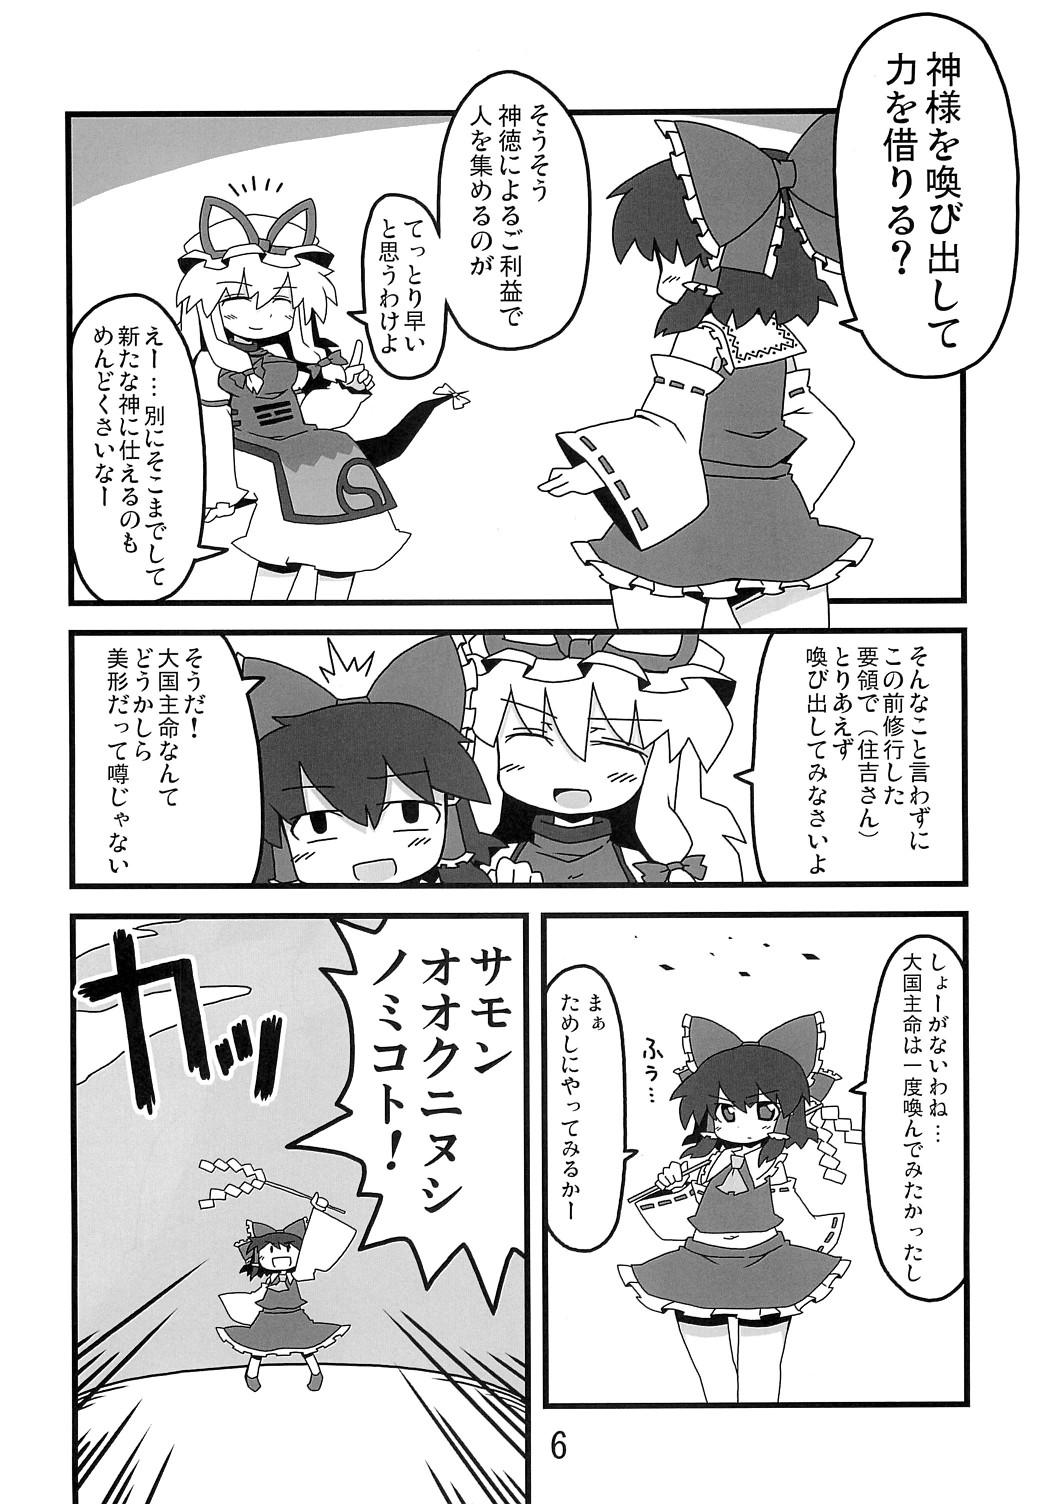 Russia 東方豊年祭 - Touhou project Shemale Sex - Page 5